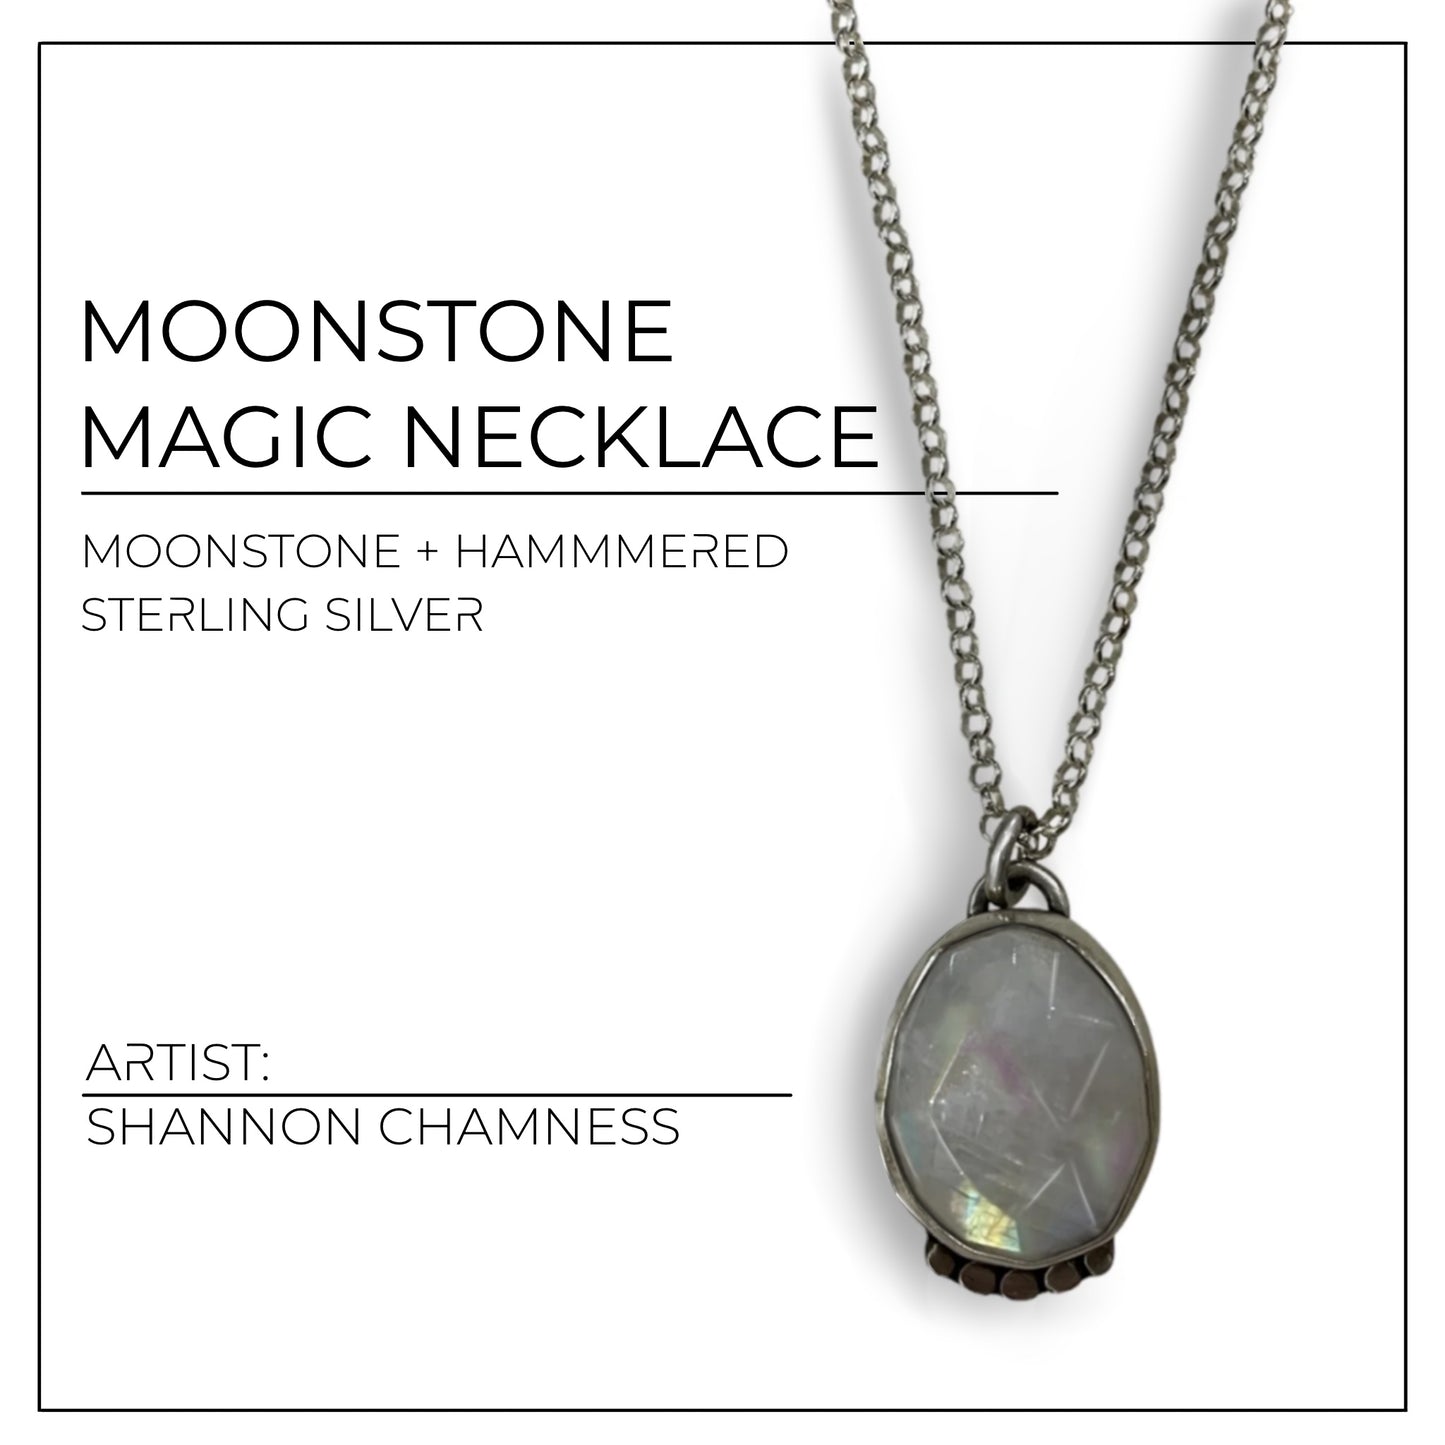 Moonstone Magic Necklace by Shannon Chamness